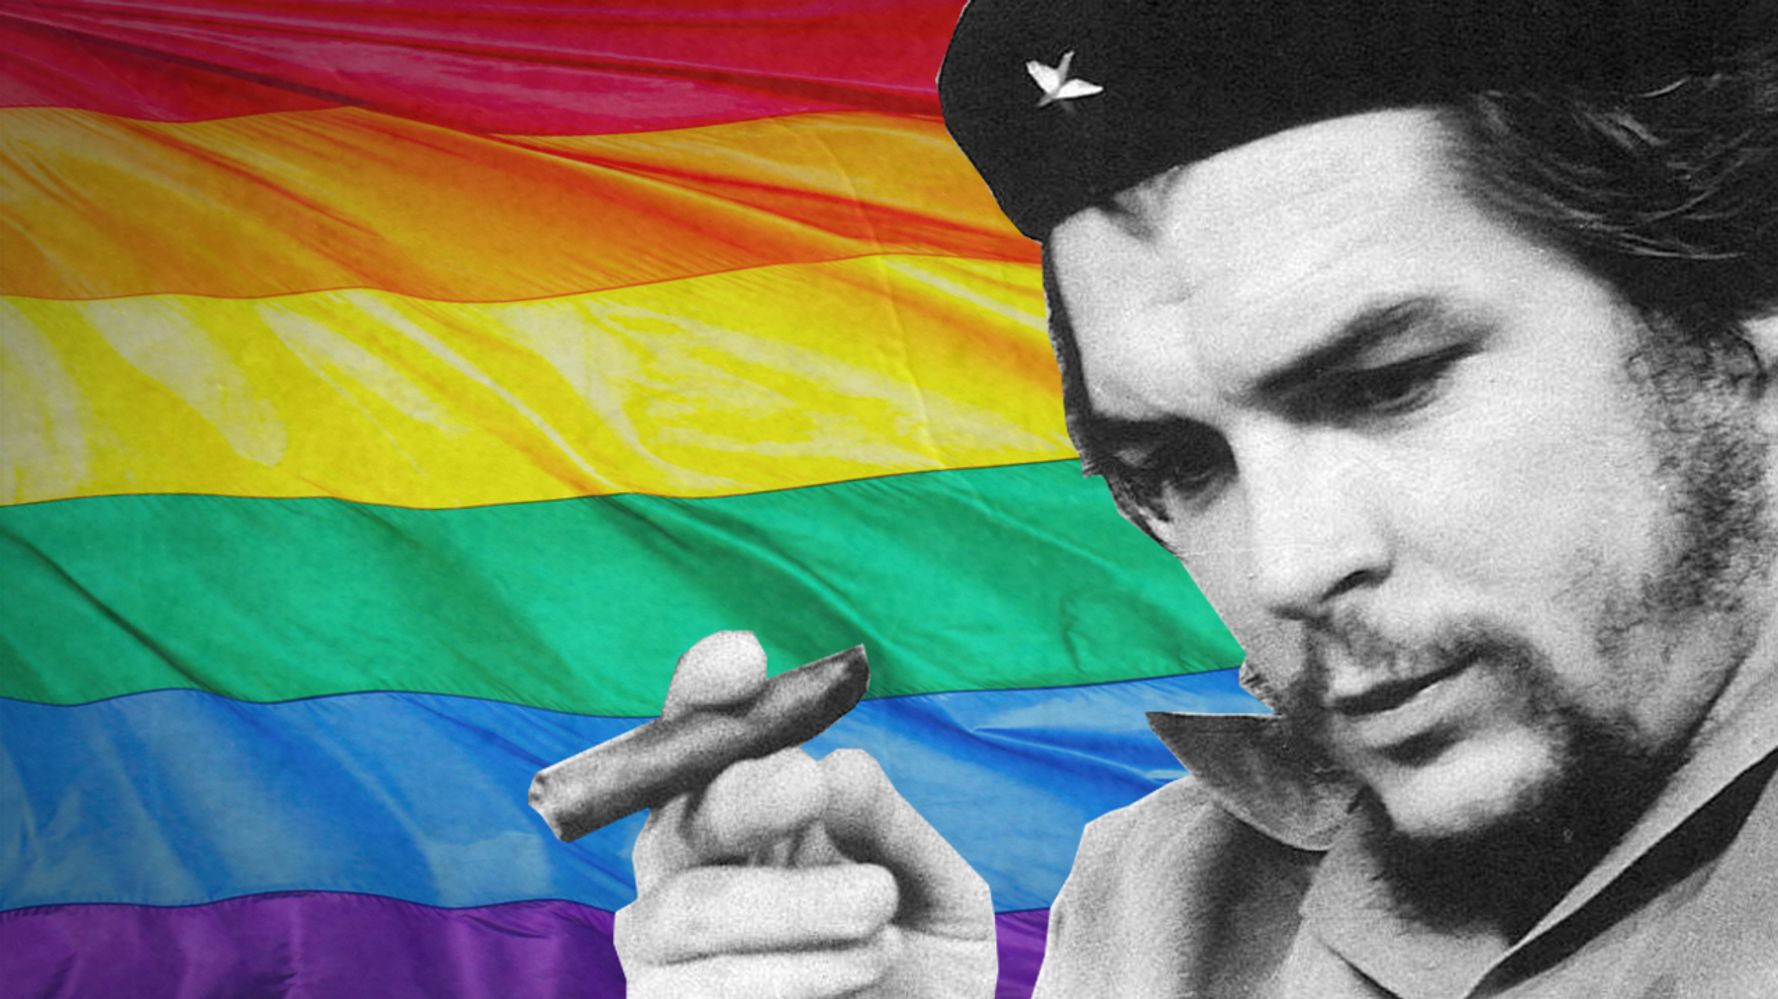 Are You Gay? Che Guevara Would Have Sent You To A Concentration Camp